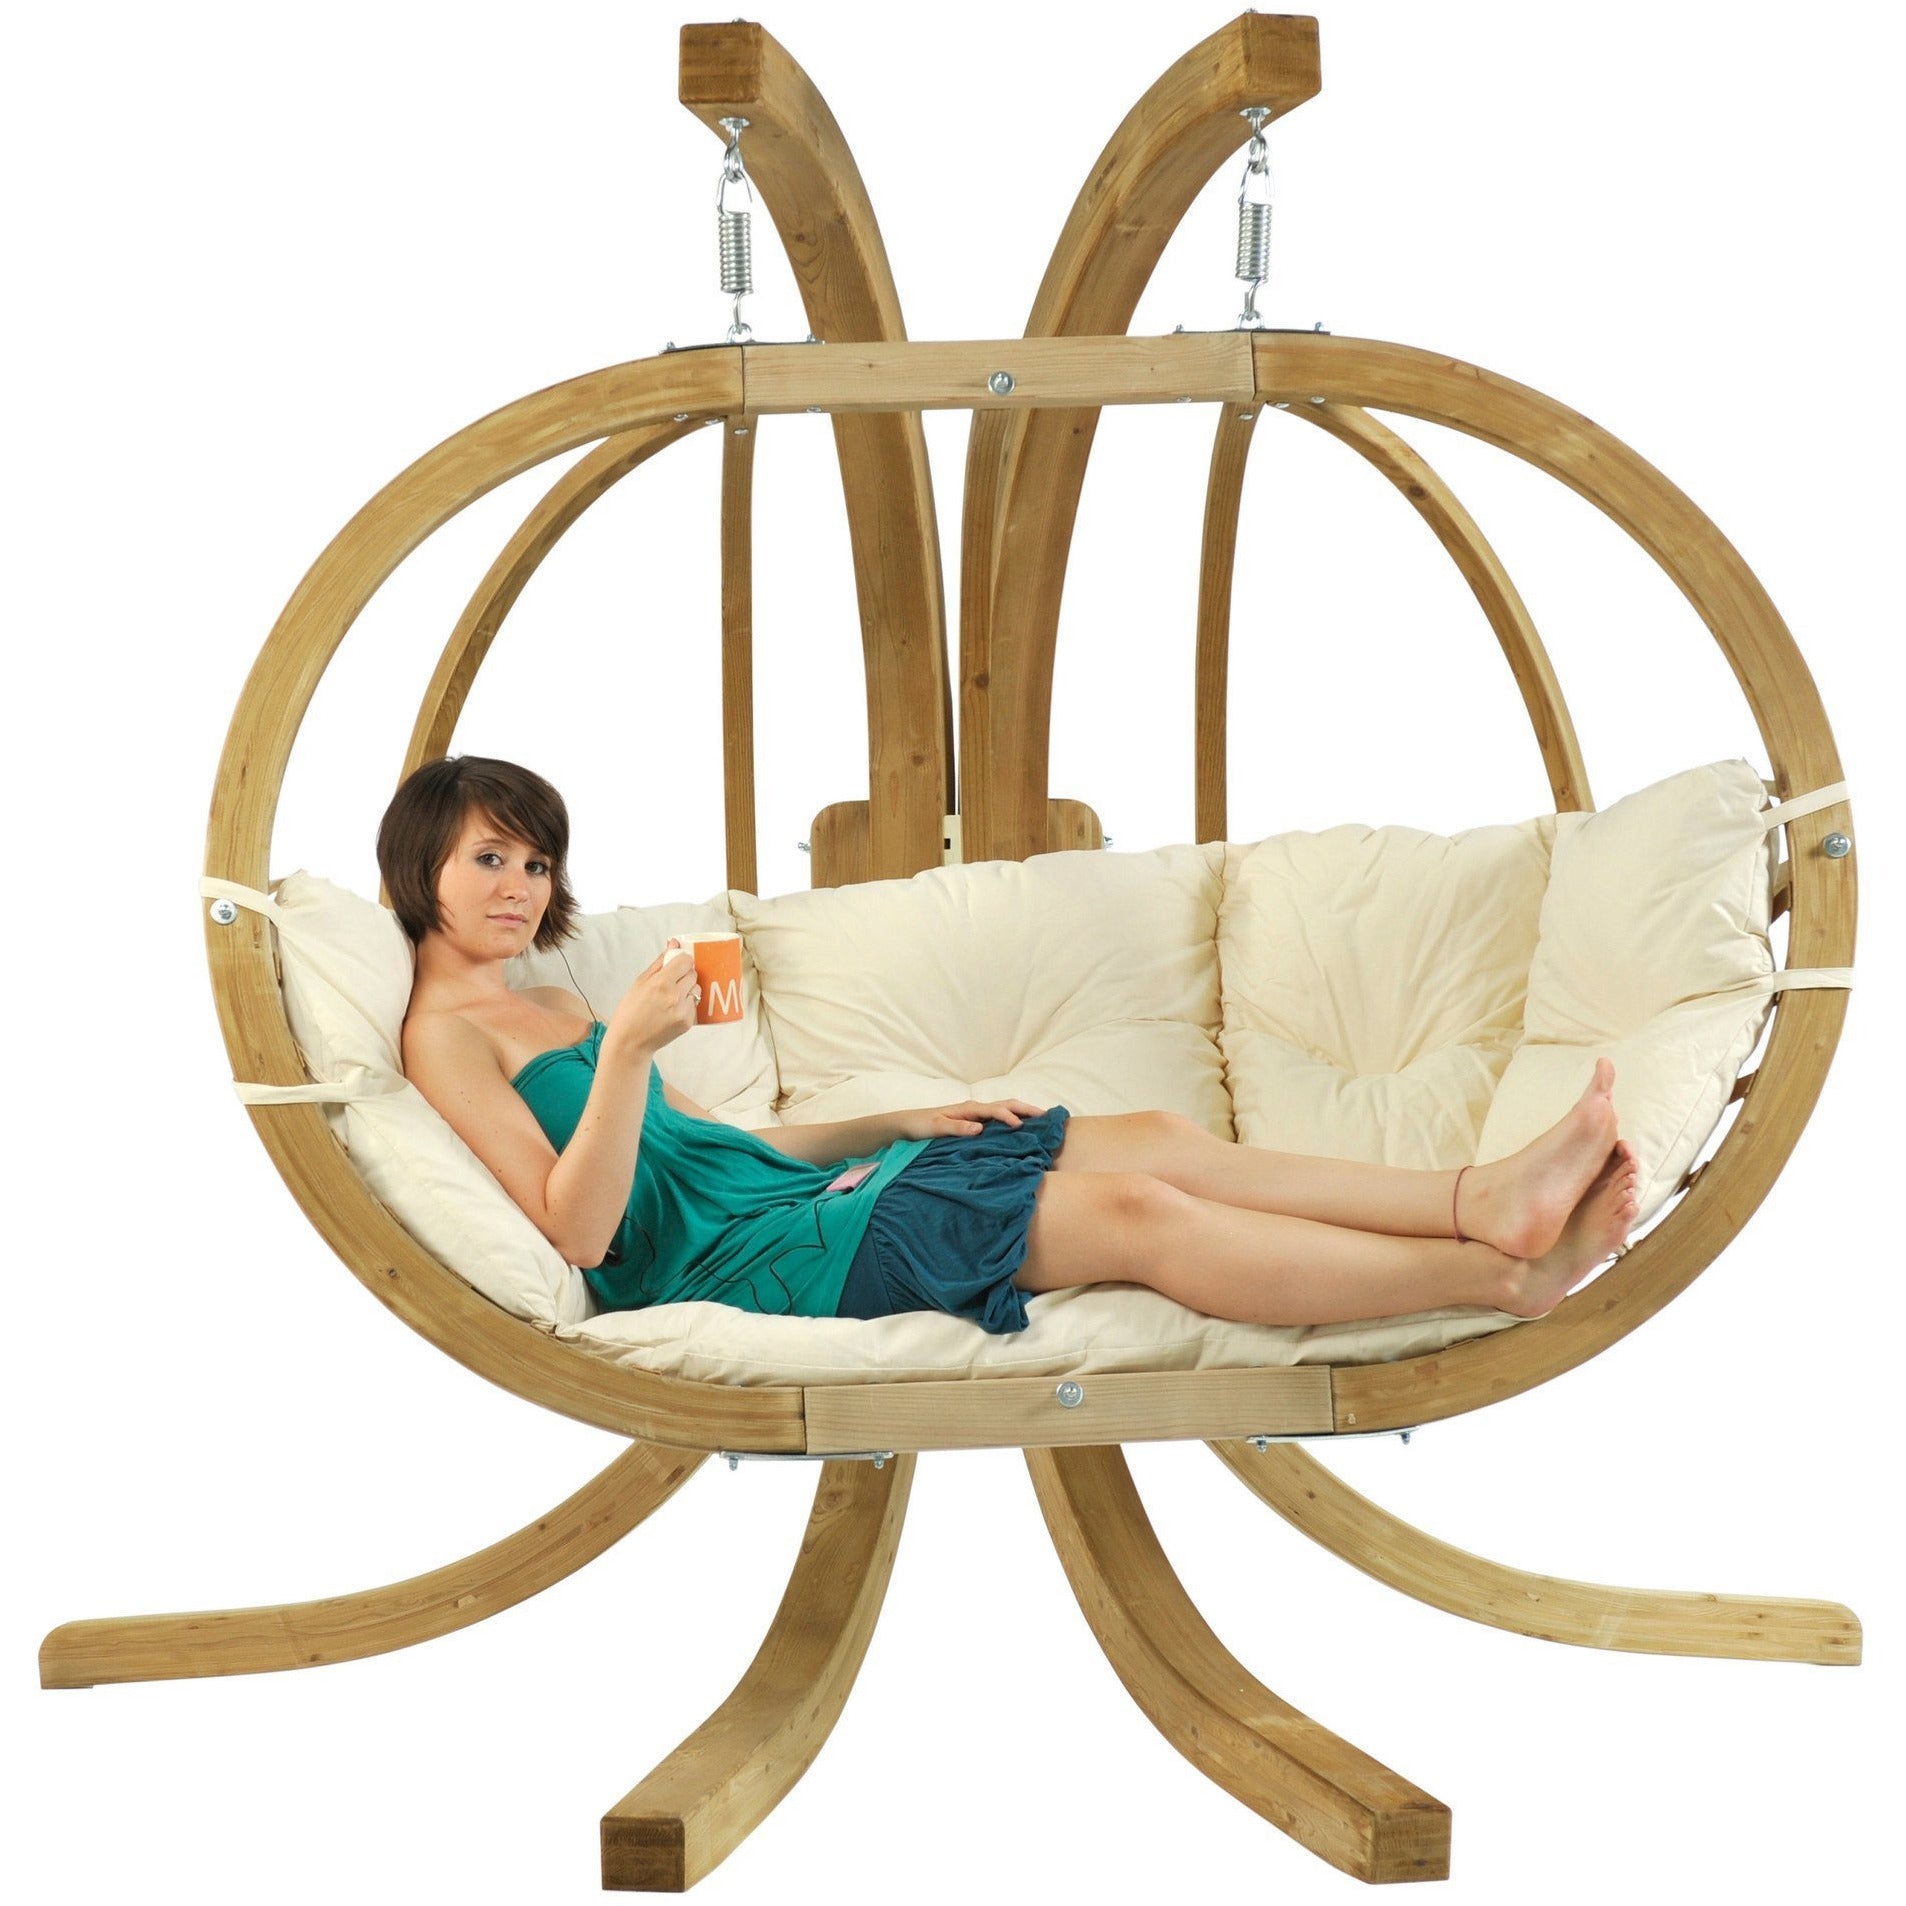 Spruce wood oval shaped hanging chair, metal fixing points, with light cream seat pillows